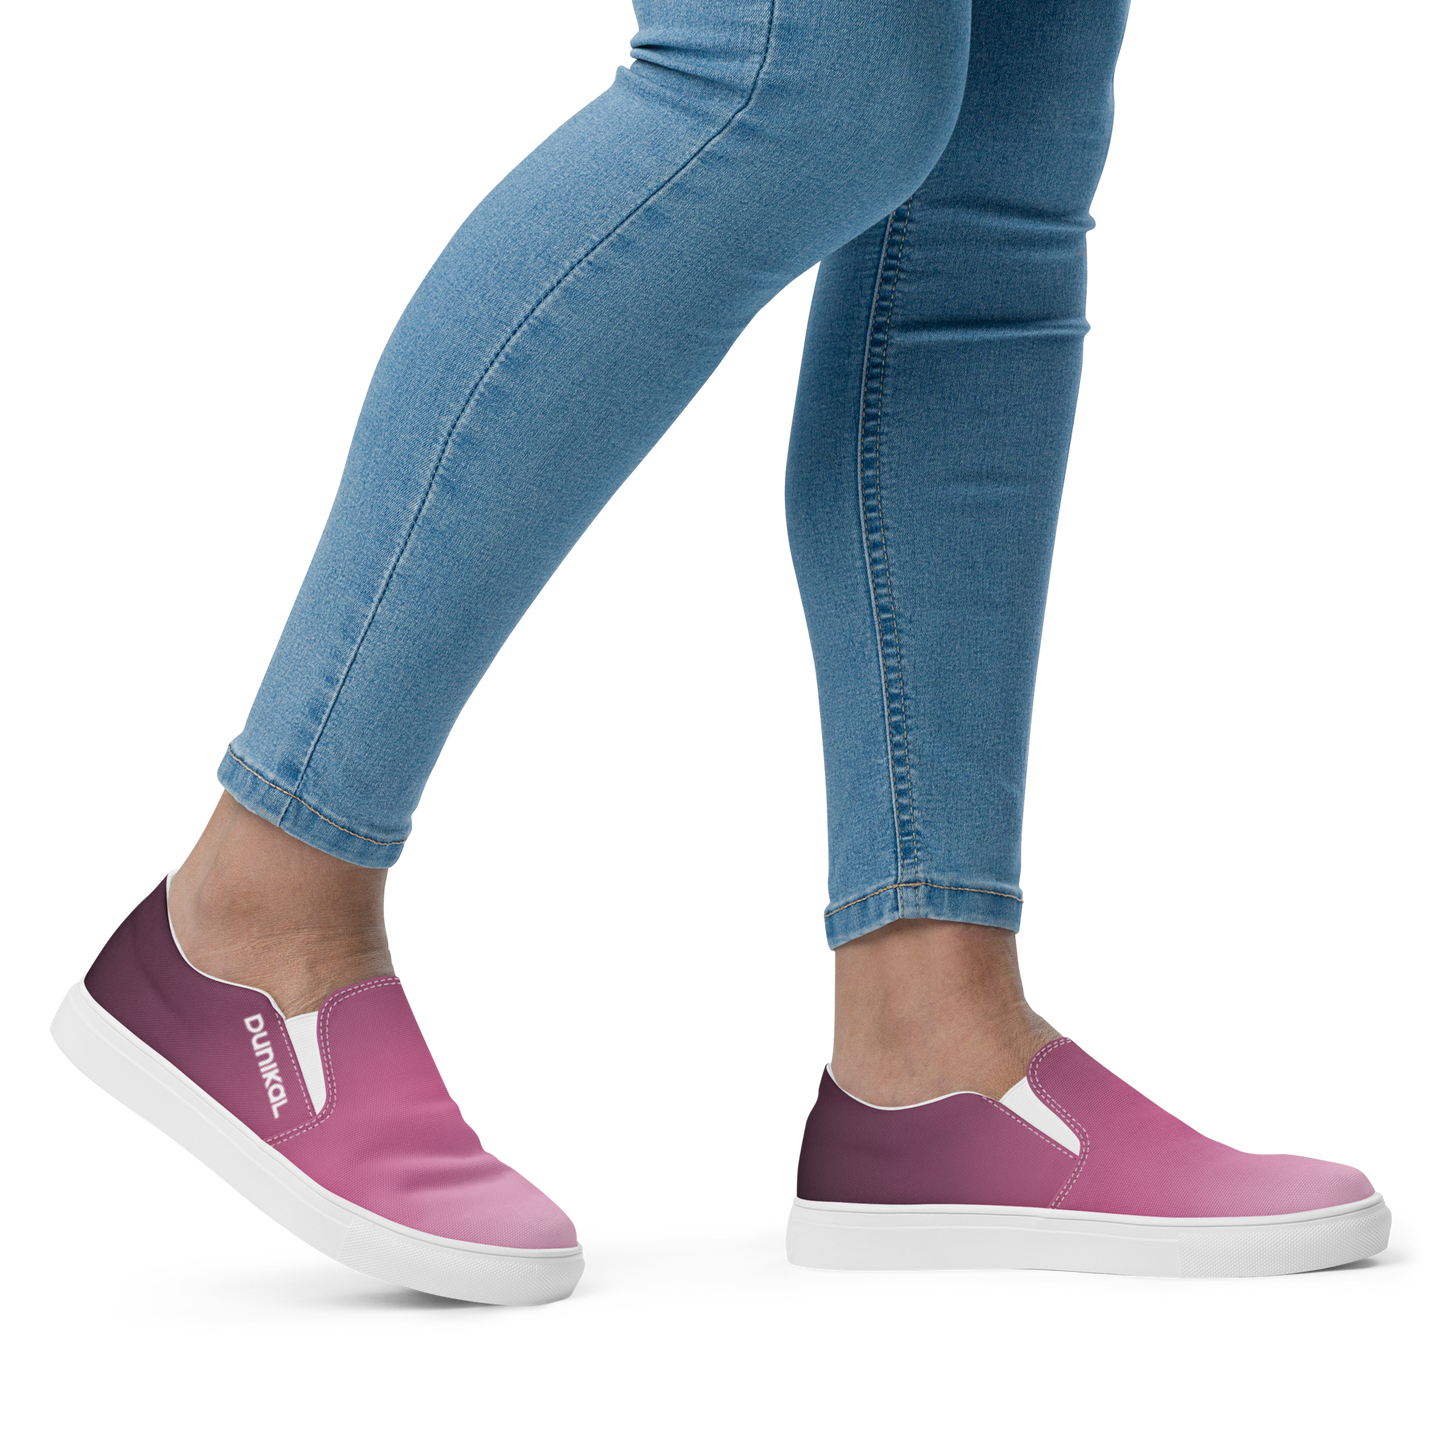 Women's Canvas Slip-Ons ❯ Pure Gradient ❯ Orchid Pink